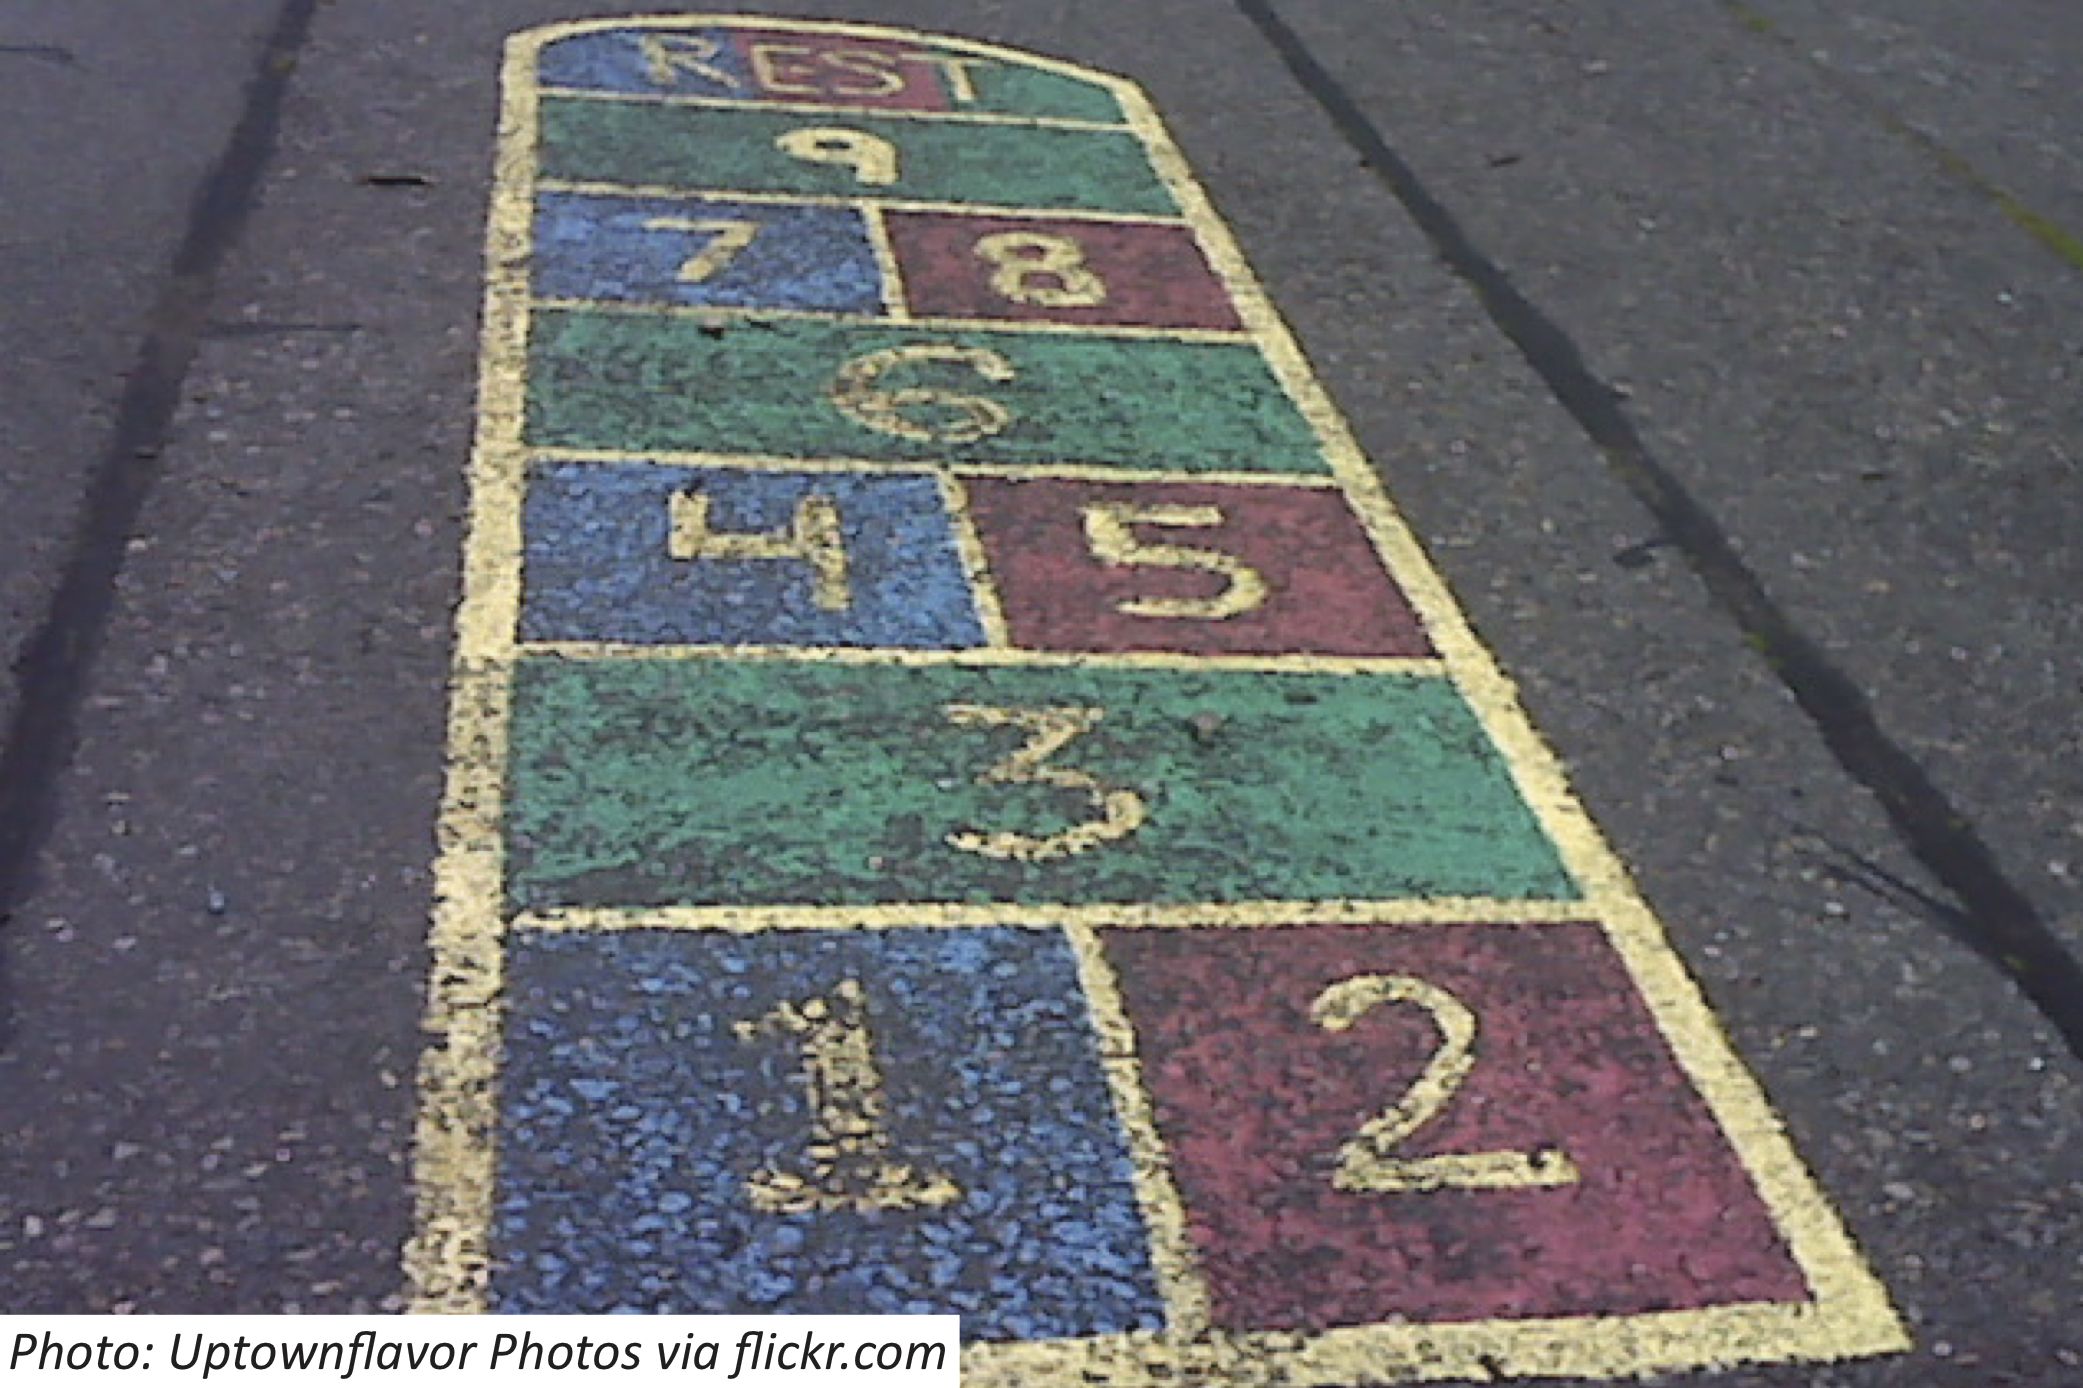 Who Invented Hopscotch?